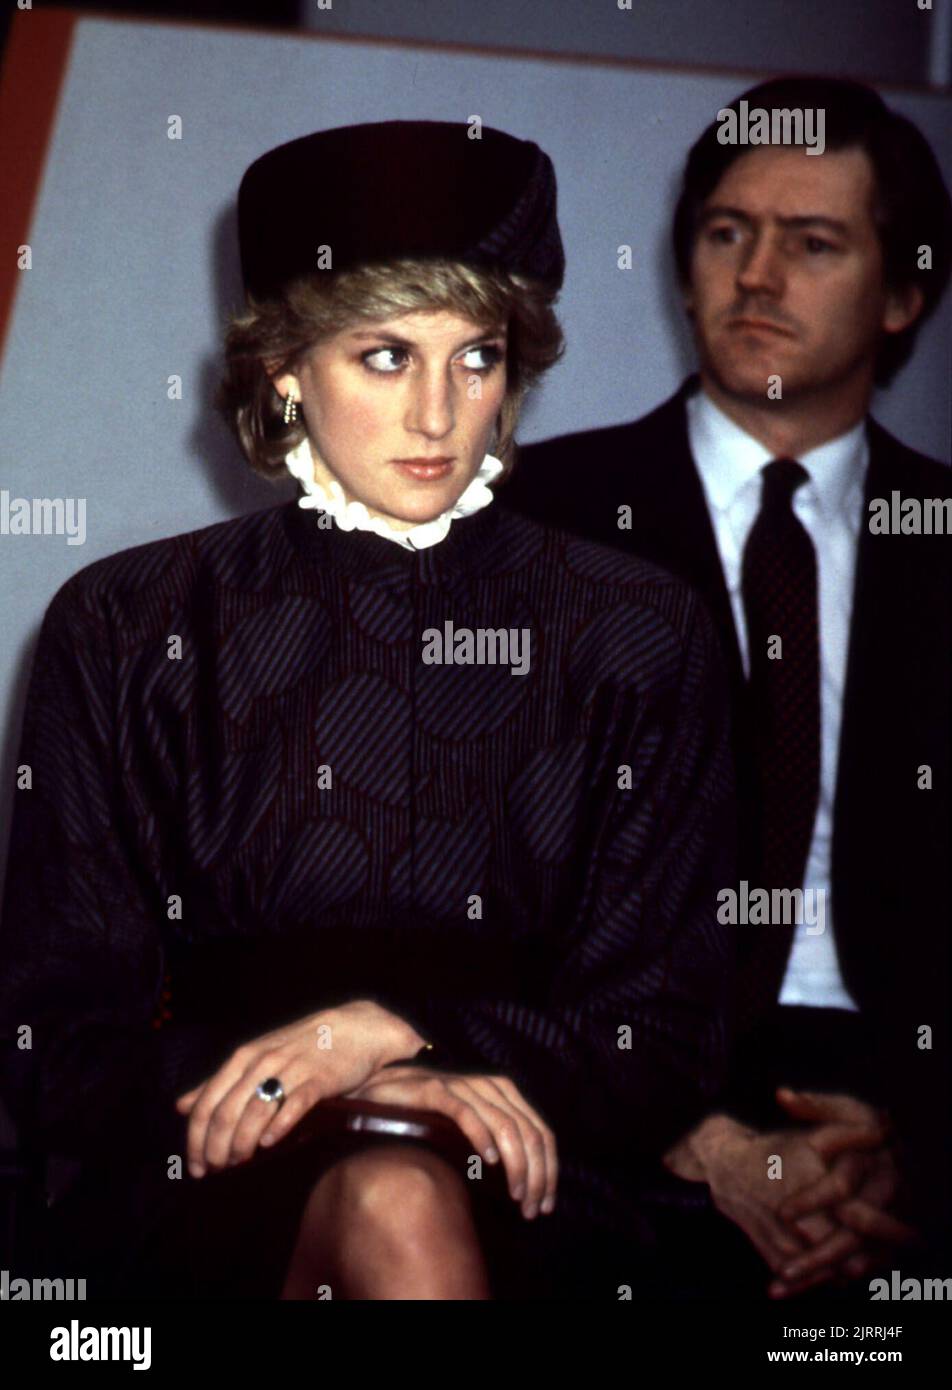 File photo dated 01/04/86 of the Princess of Wales at Heathrow Airport in London. Diana, Princess of Wales, was killed on August 31 1997 in a car crash in the Pont de l'Alma tunnel in Paris. Issue date: Friday August 26, 2022. Stock Photo